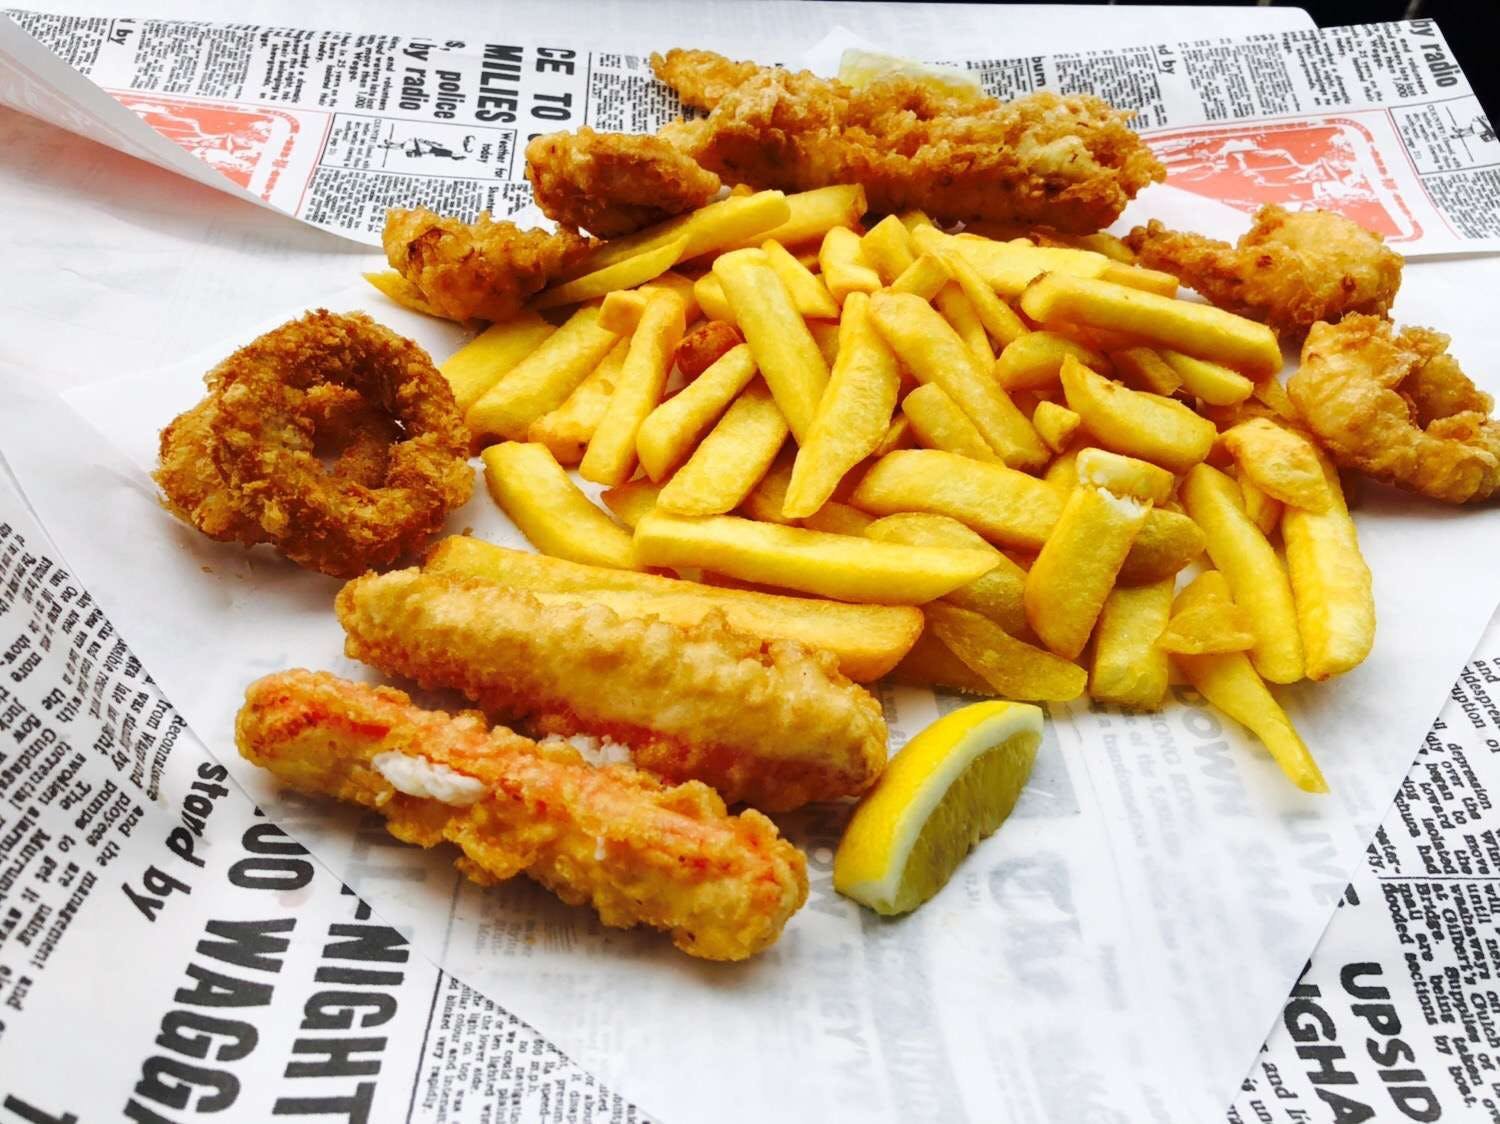 Oakleigh Fish  Chippery - Food Delivery Shop